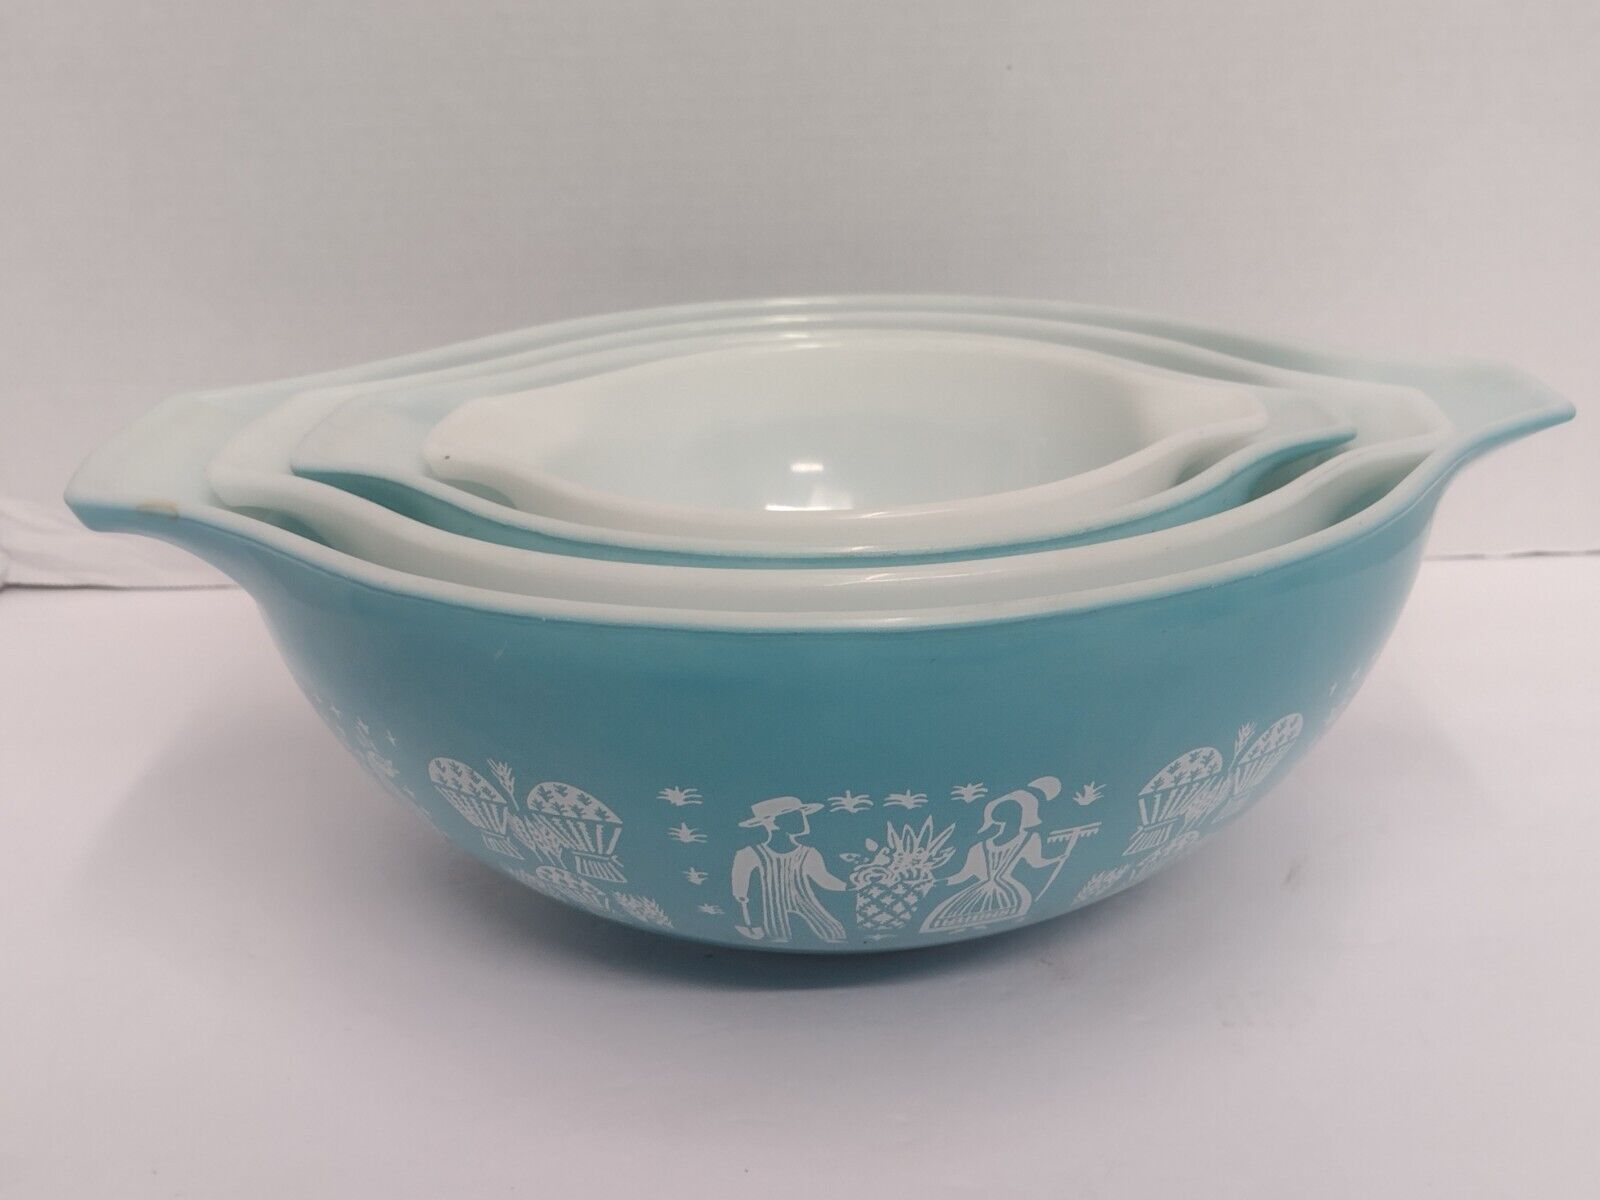 Vintage Pyrex Set of 4 Nesting Mixing Bowls Turquoise White Amish Butter Print 